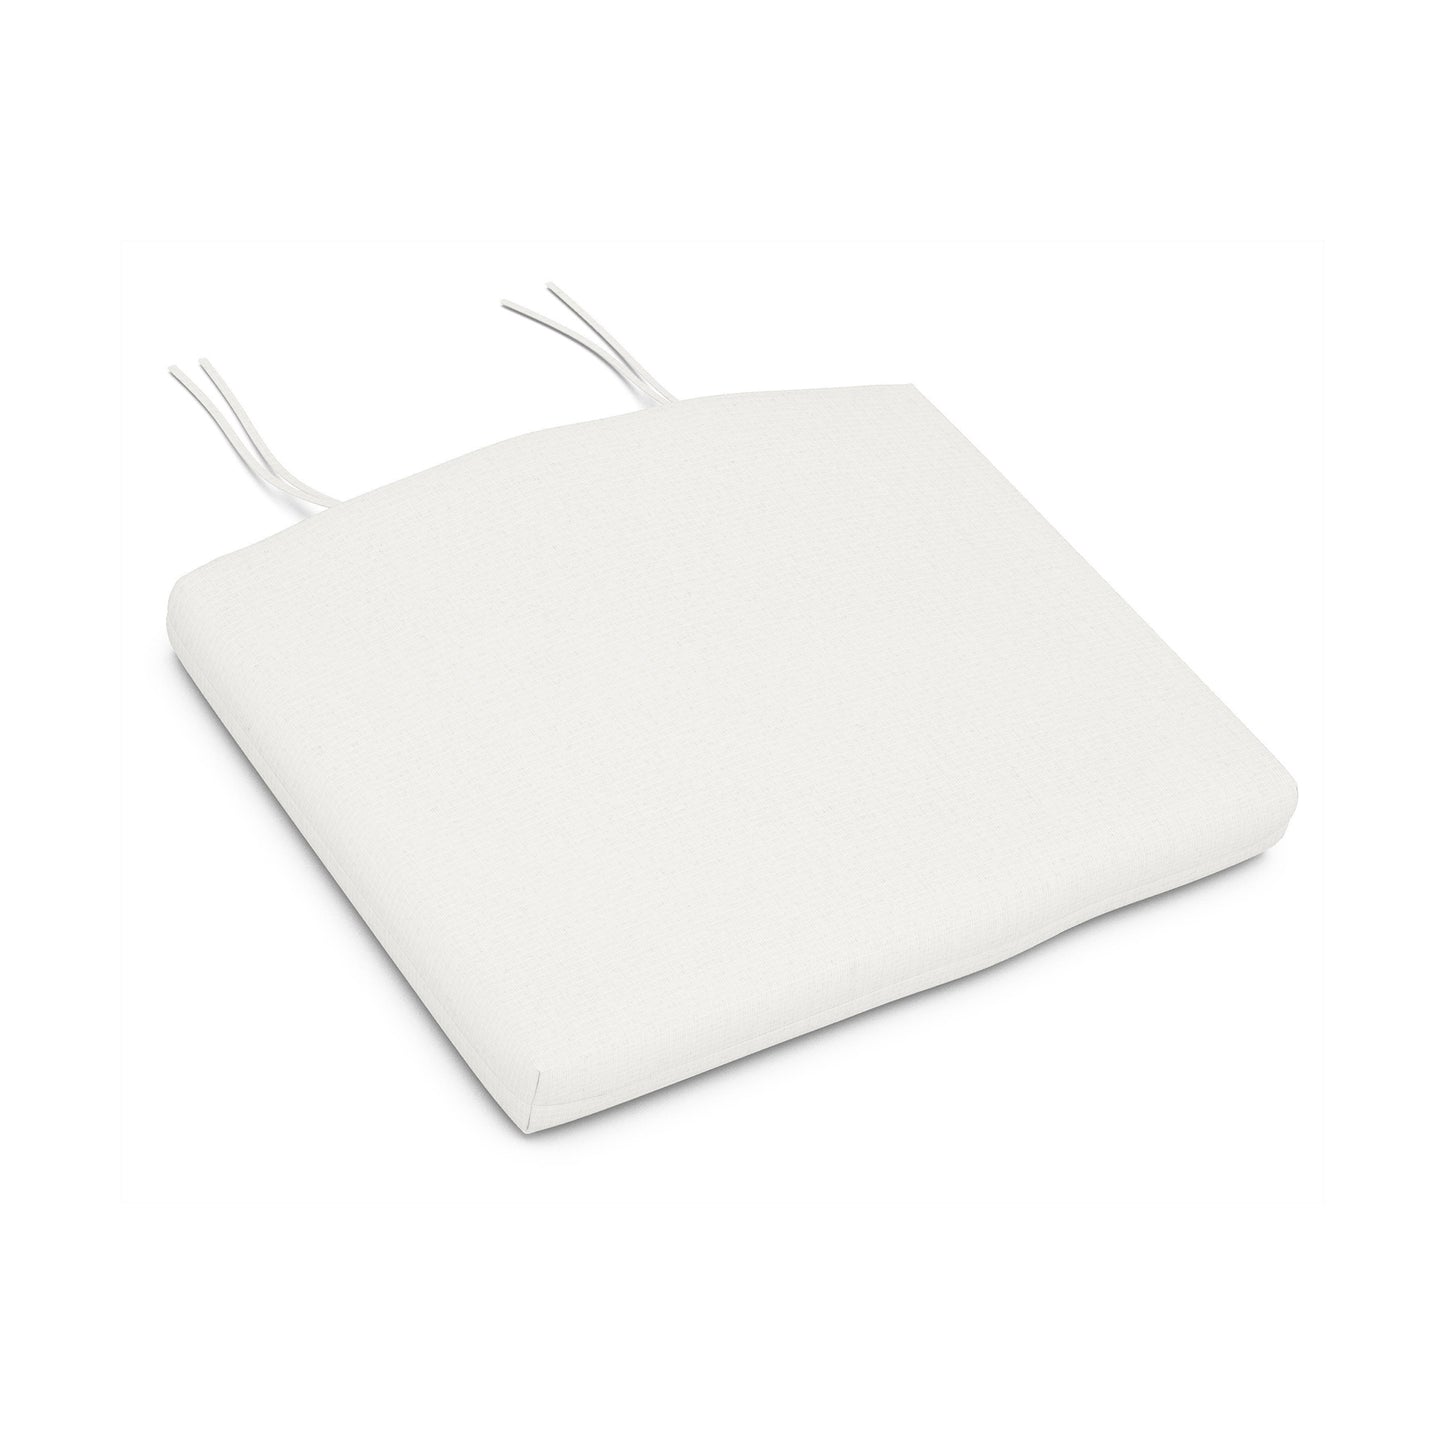 A white square POLYWOOD® XPWS0153 seat cushion with two loose string ties on each side, placed on a white background.